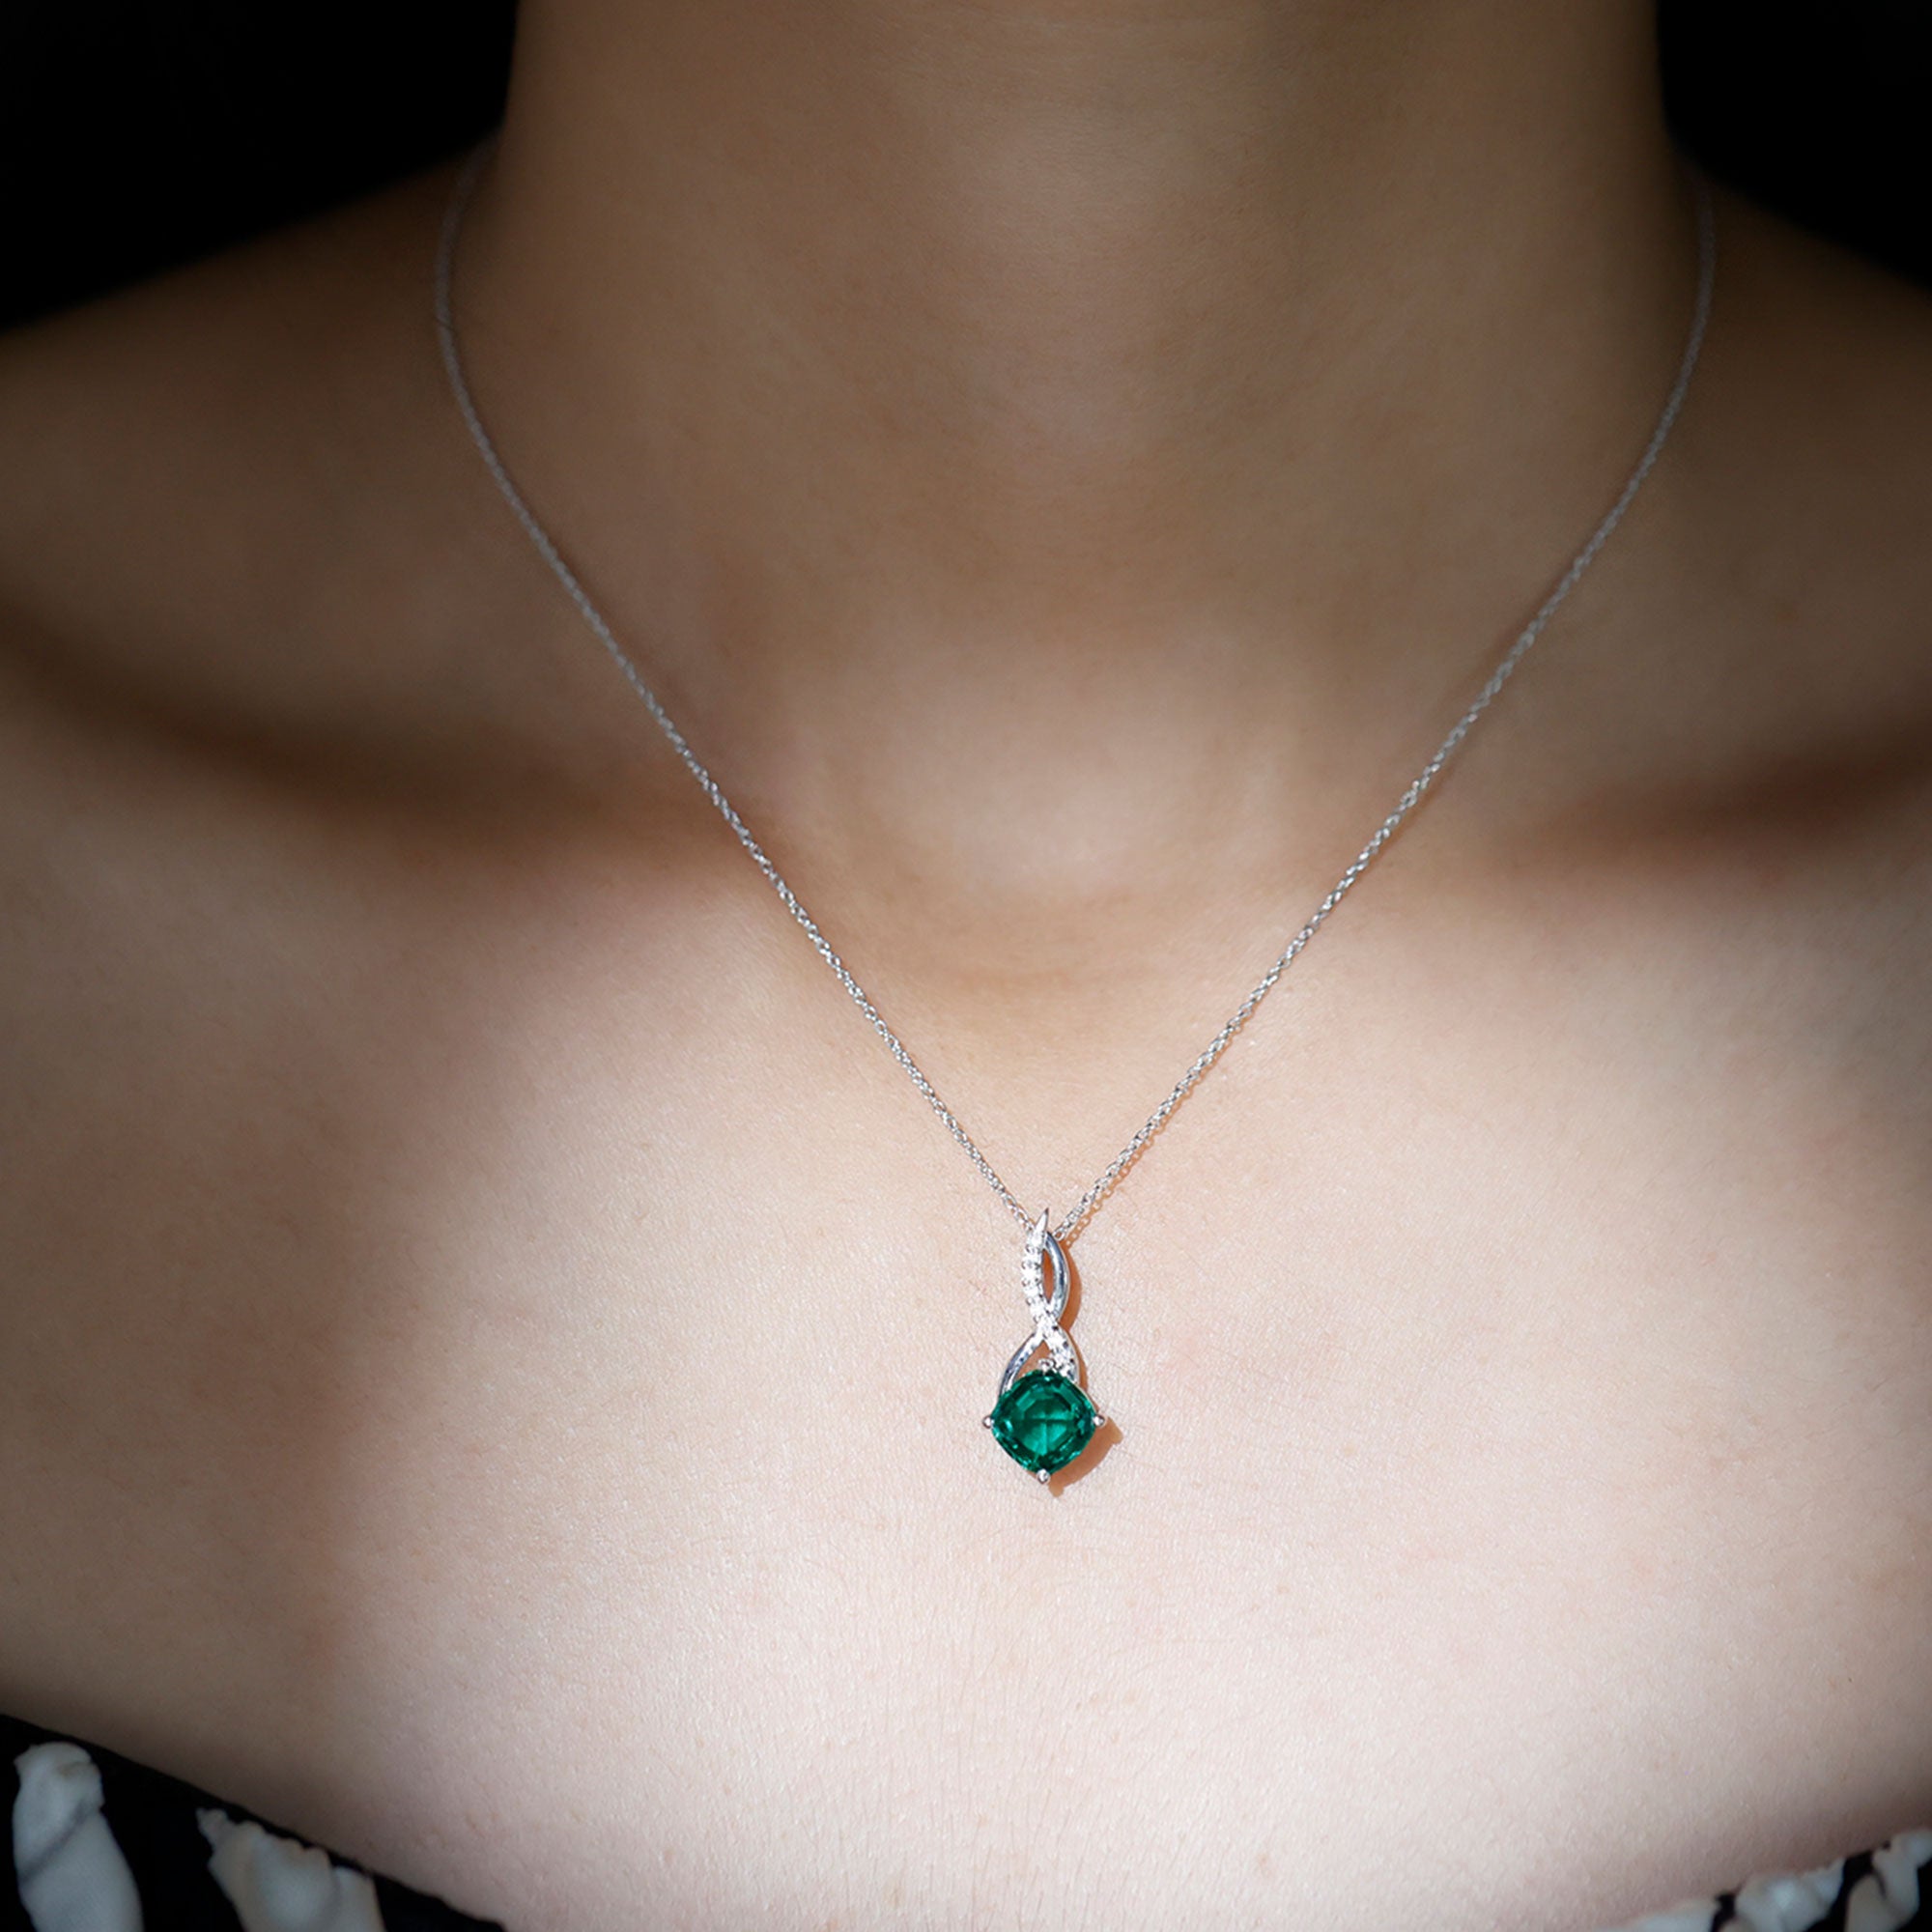 Cushion Cut Created Emerald Solitaire Infinity Pendant with Moissanite Lab Created Emerald - ( AAAA ) - Quality - Rosec Jewels